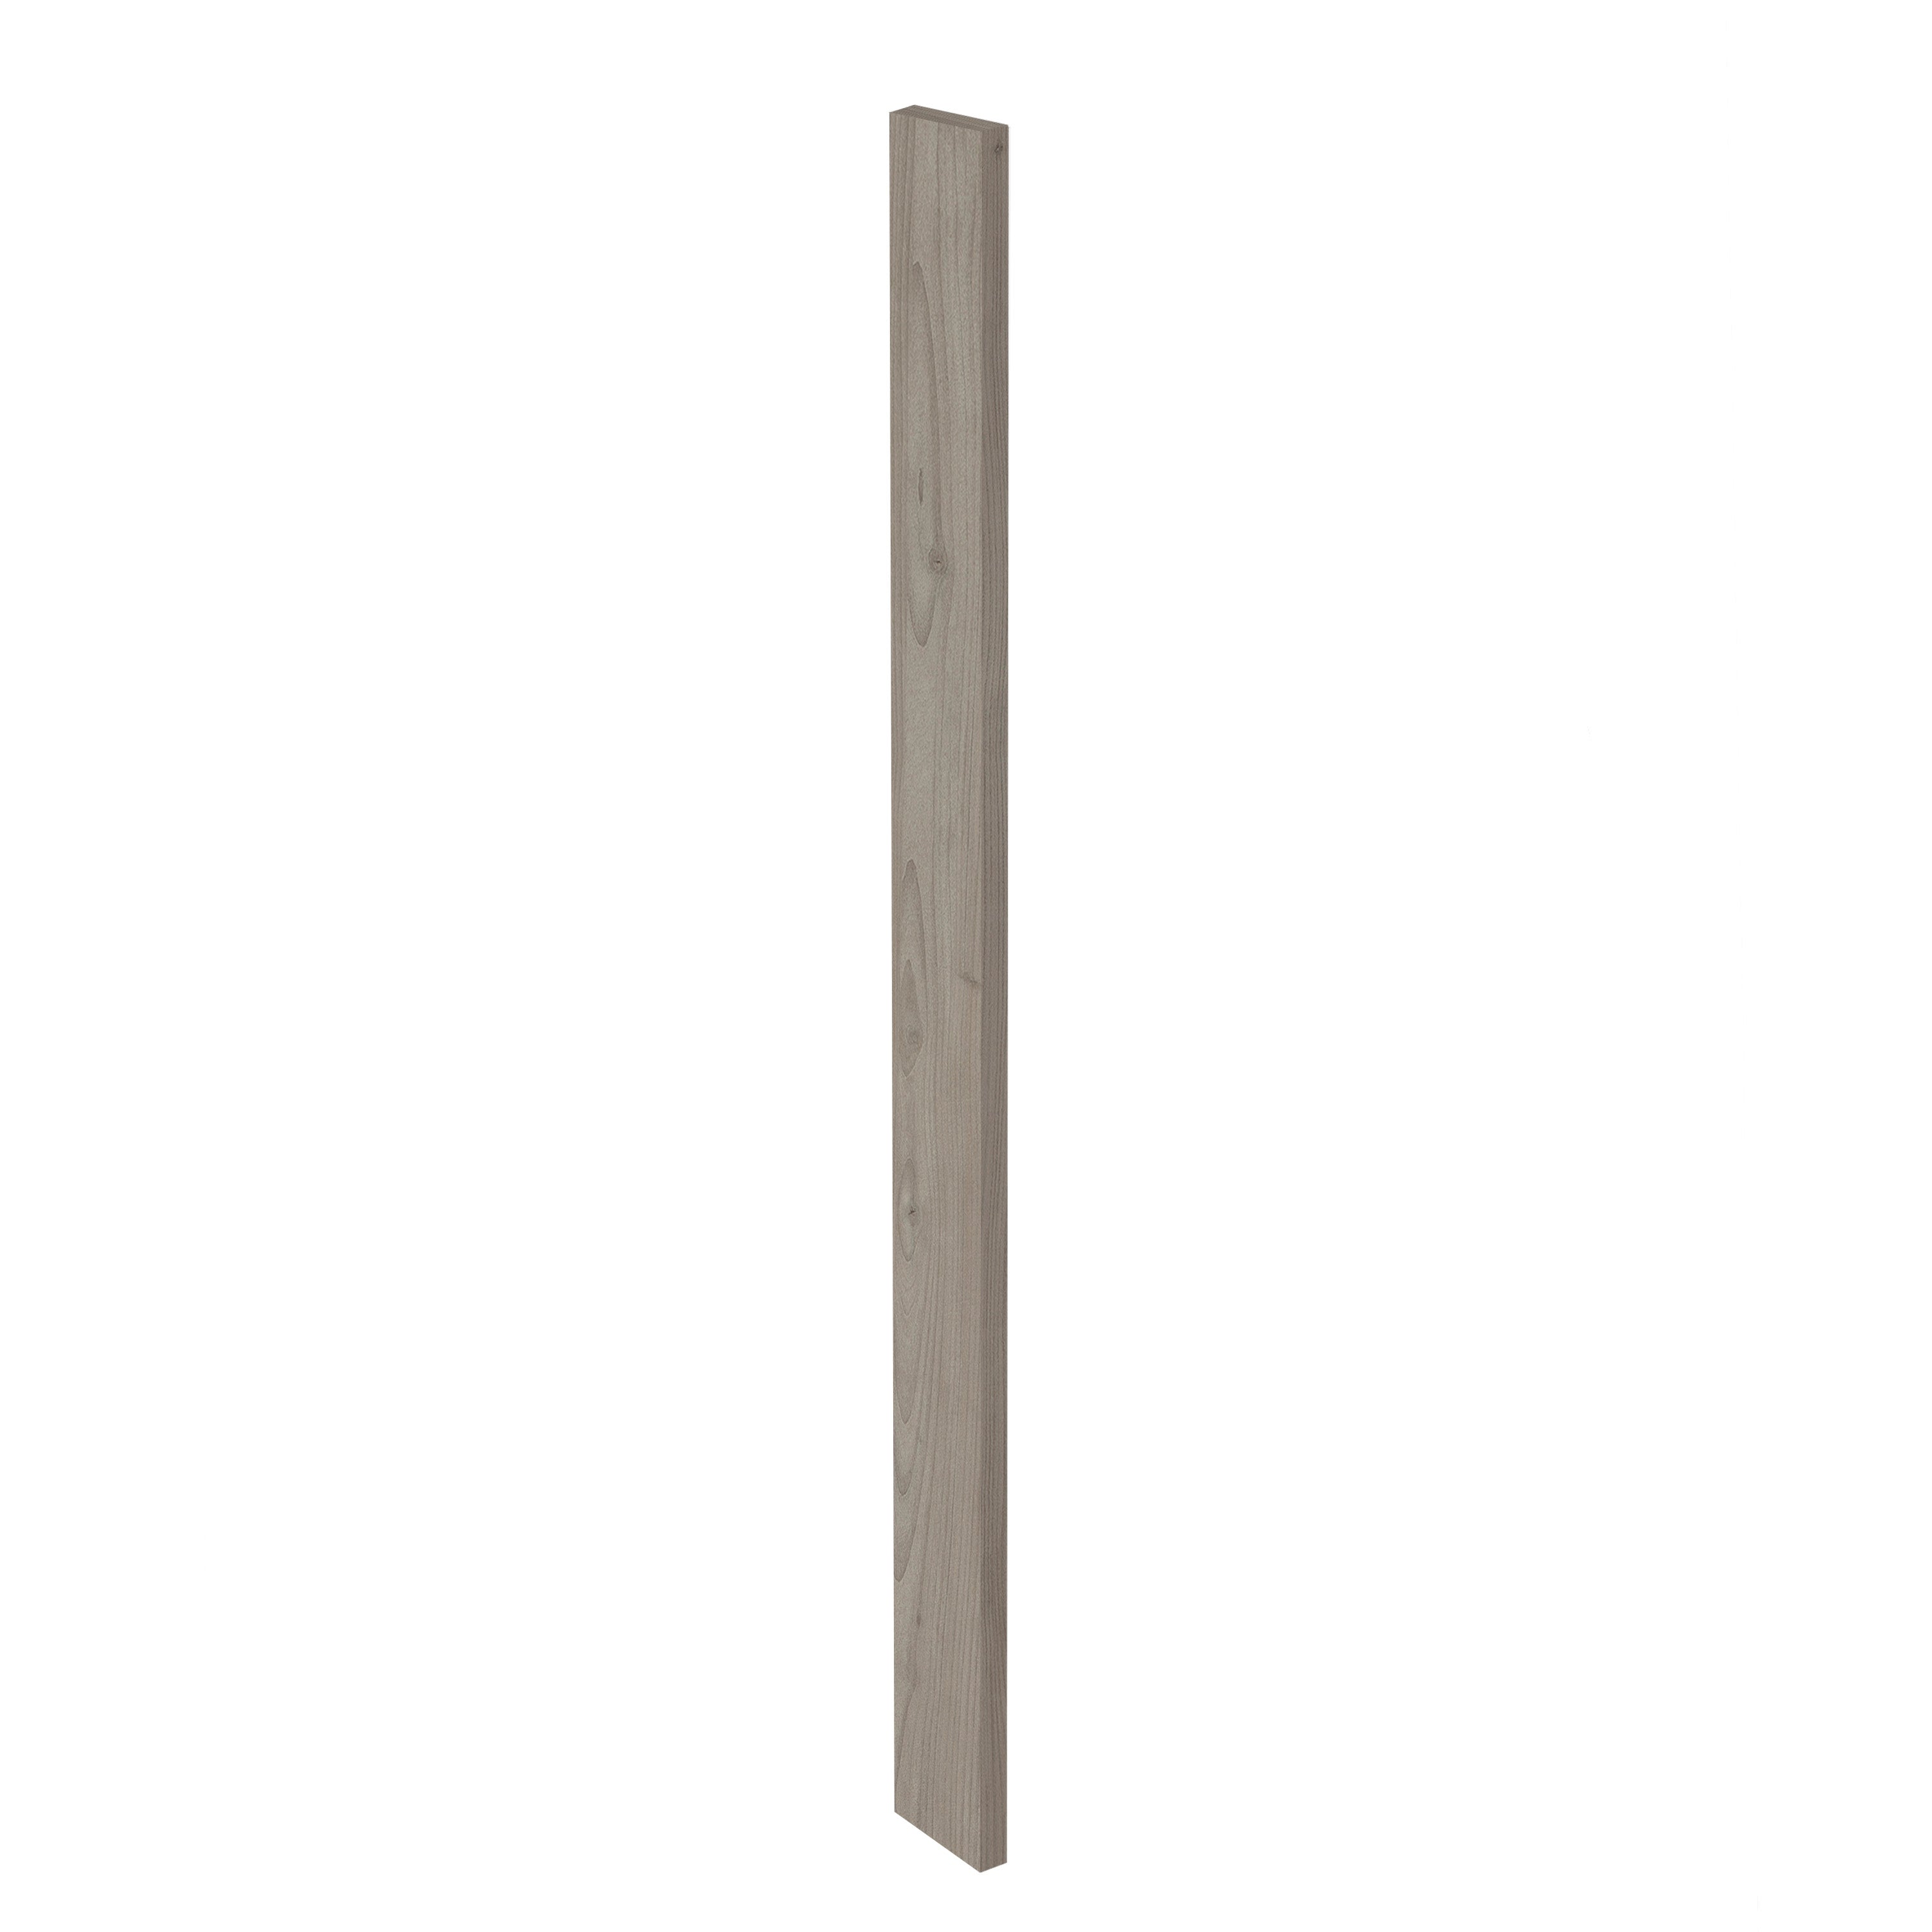 Grey Nordic Slab Style Kitchen Cabinet Filler (3 in W x 0.75 in D x 42 in H) -  Pro-Edge HD